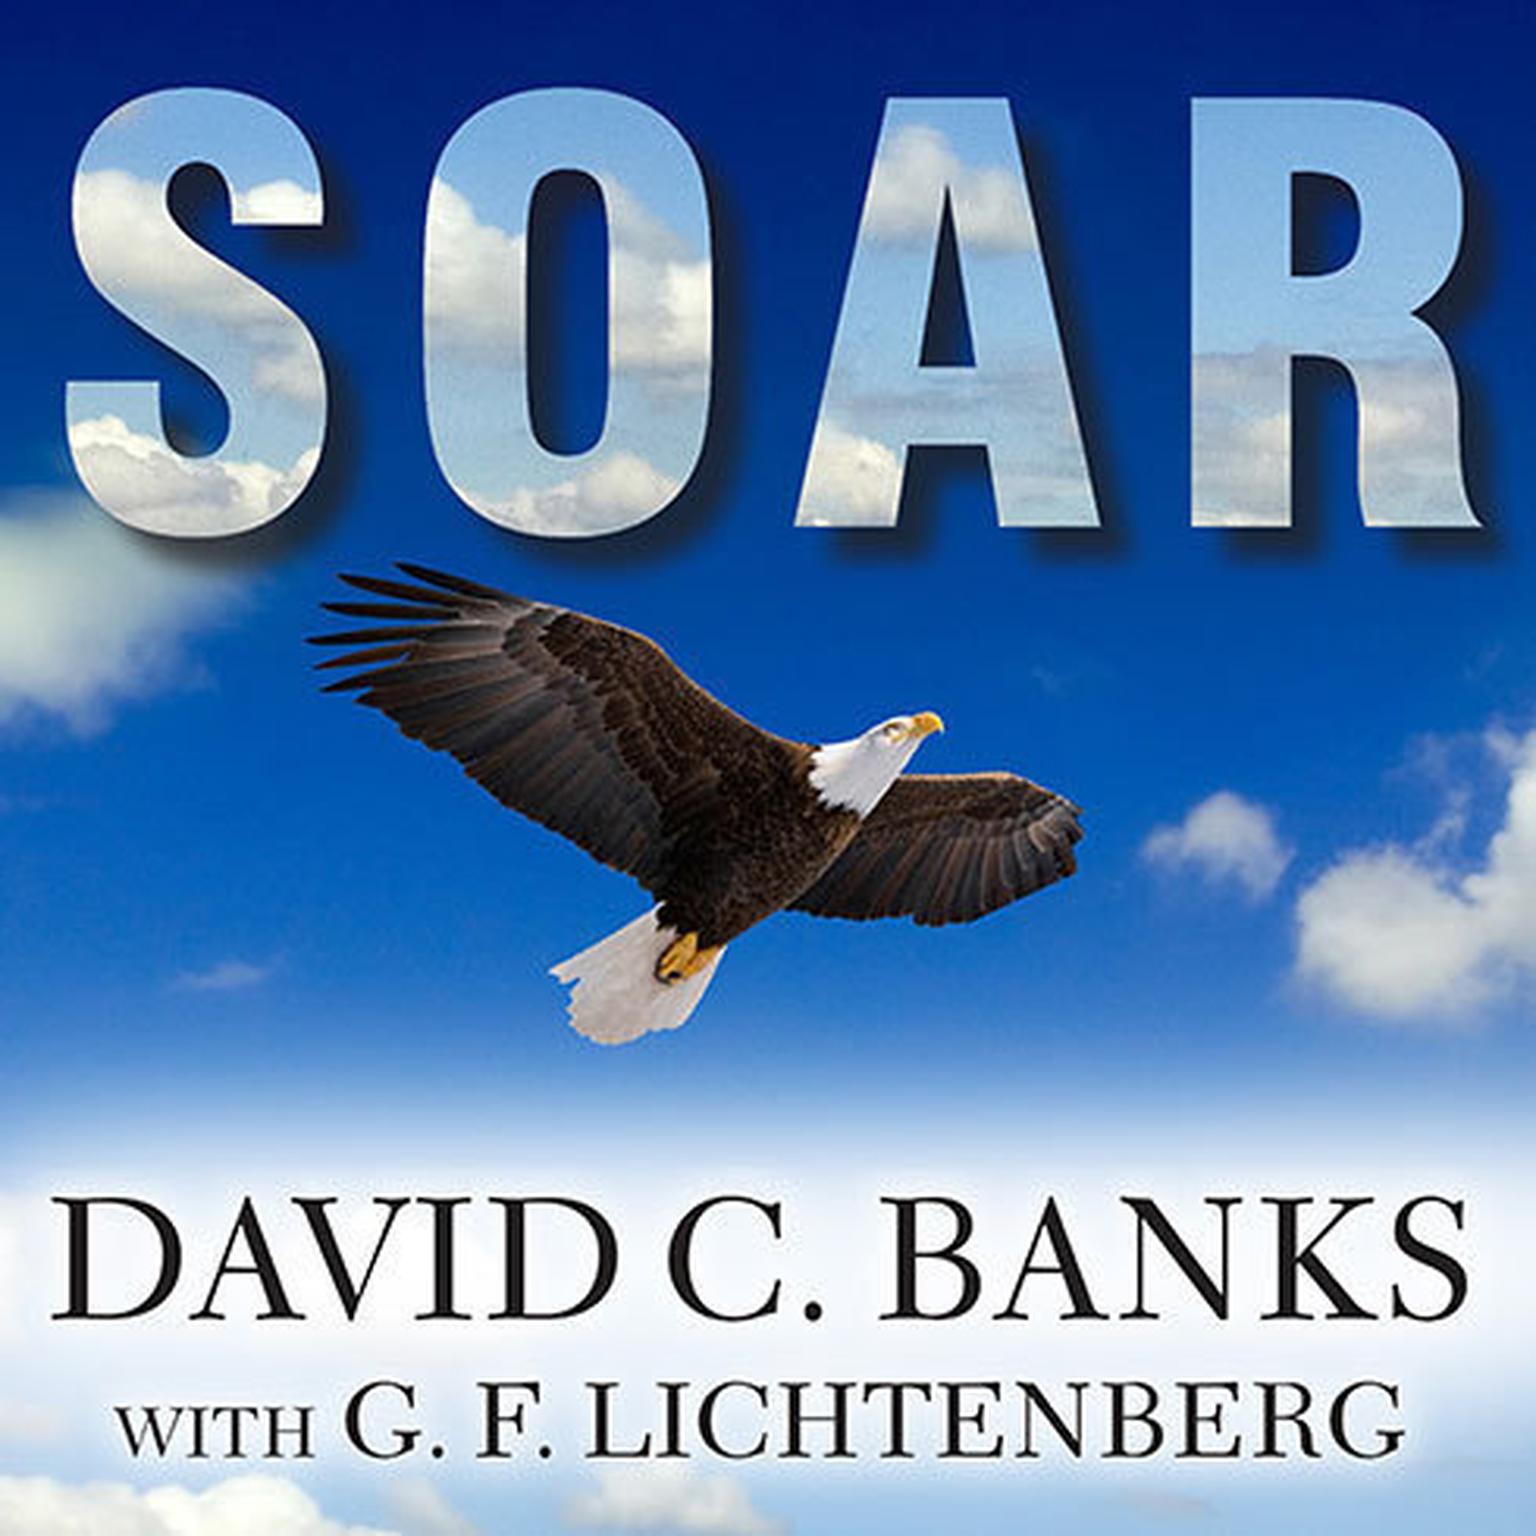 Soar: How Boys Learn, Succeed, and Develop Character Audiobook, by David C. Banks